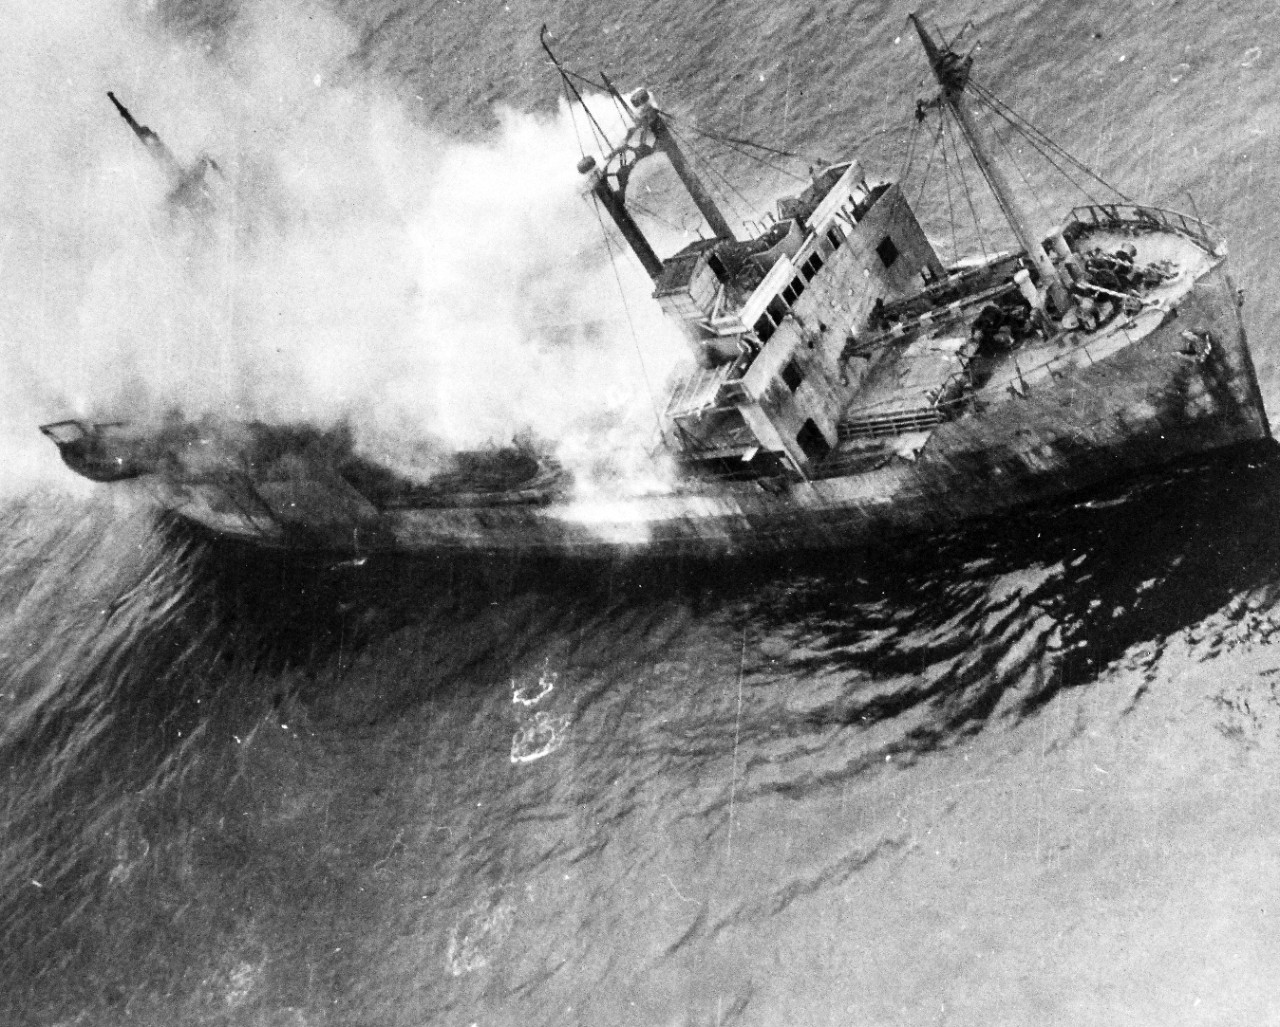 80-G-490161:  Raids on Japanese Home Islands, July 1945.  A small Japanese freighter caught by far ranging planes near Amakasu, Japan, billows smoke while flames crackle amidships. U.S. Navy Photograph, now in the collections of the National Archives. (2015/12/08). 